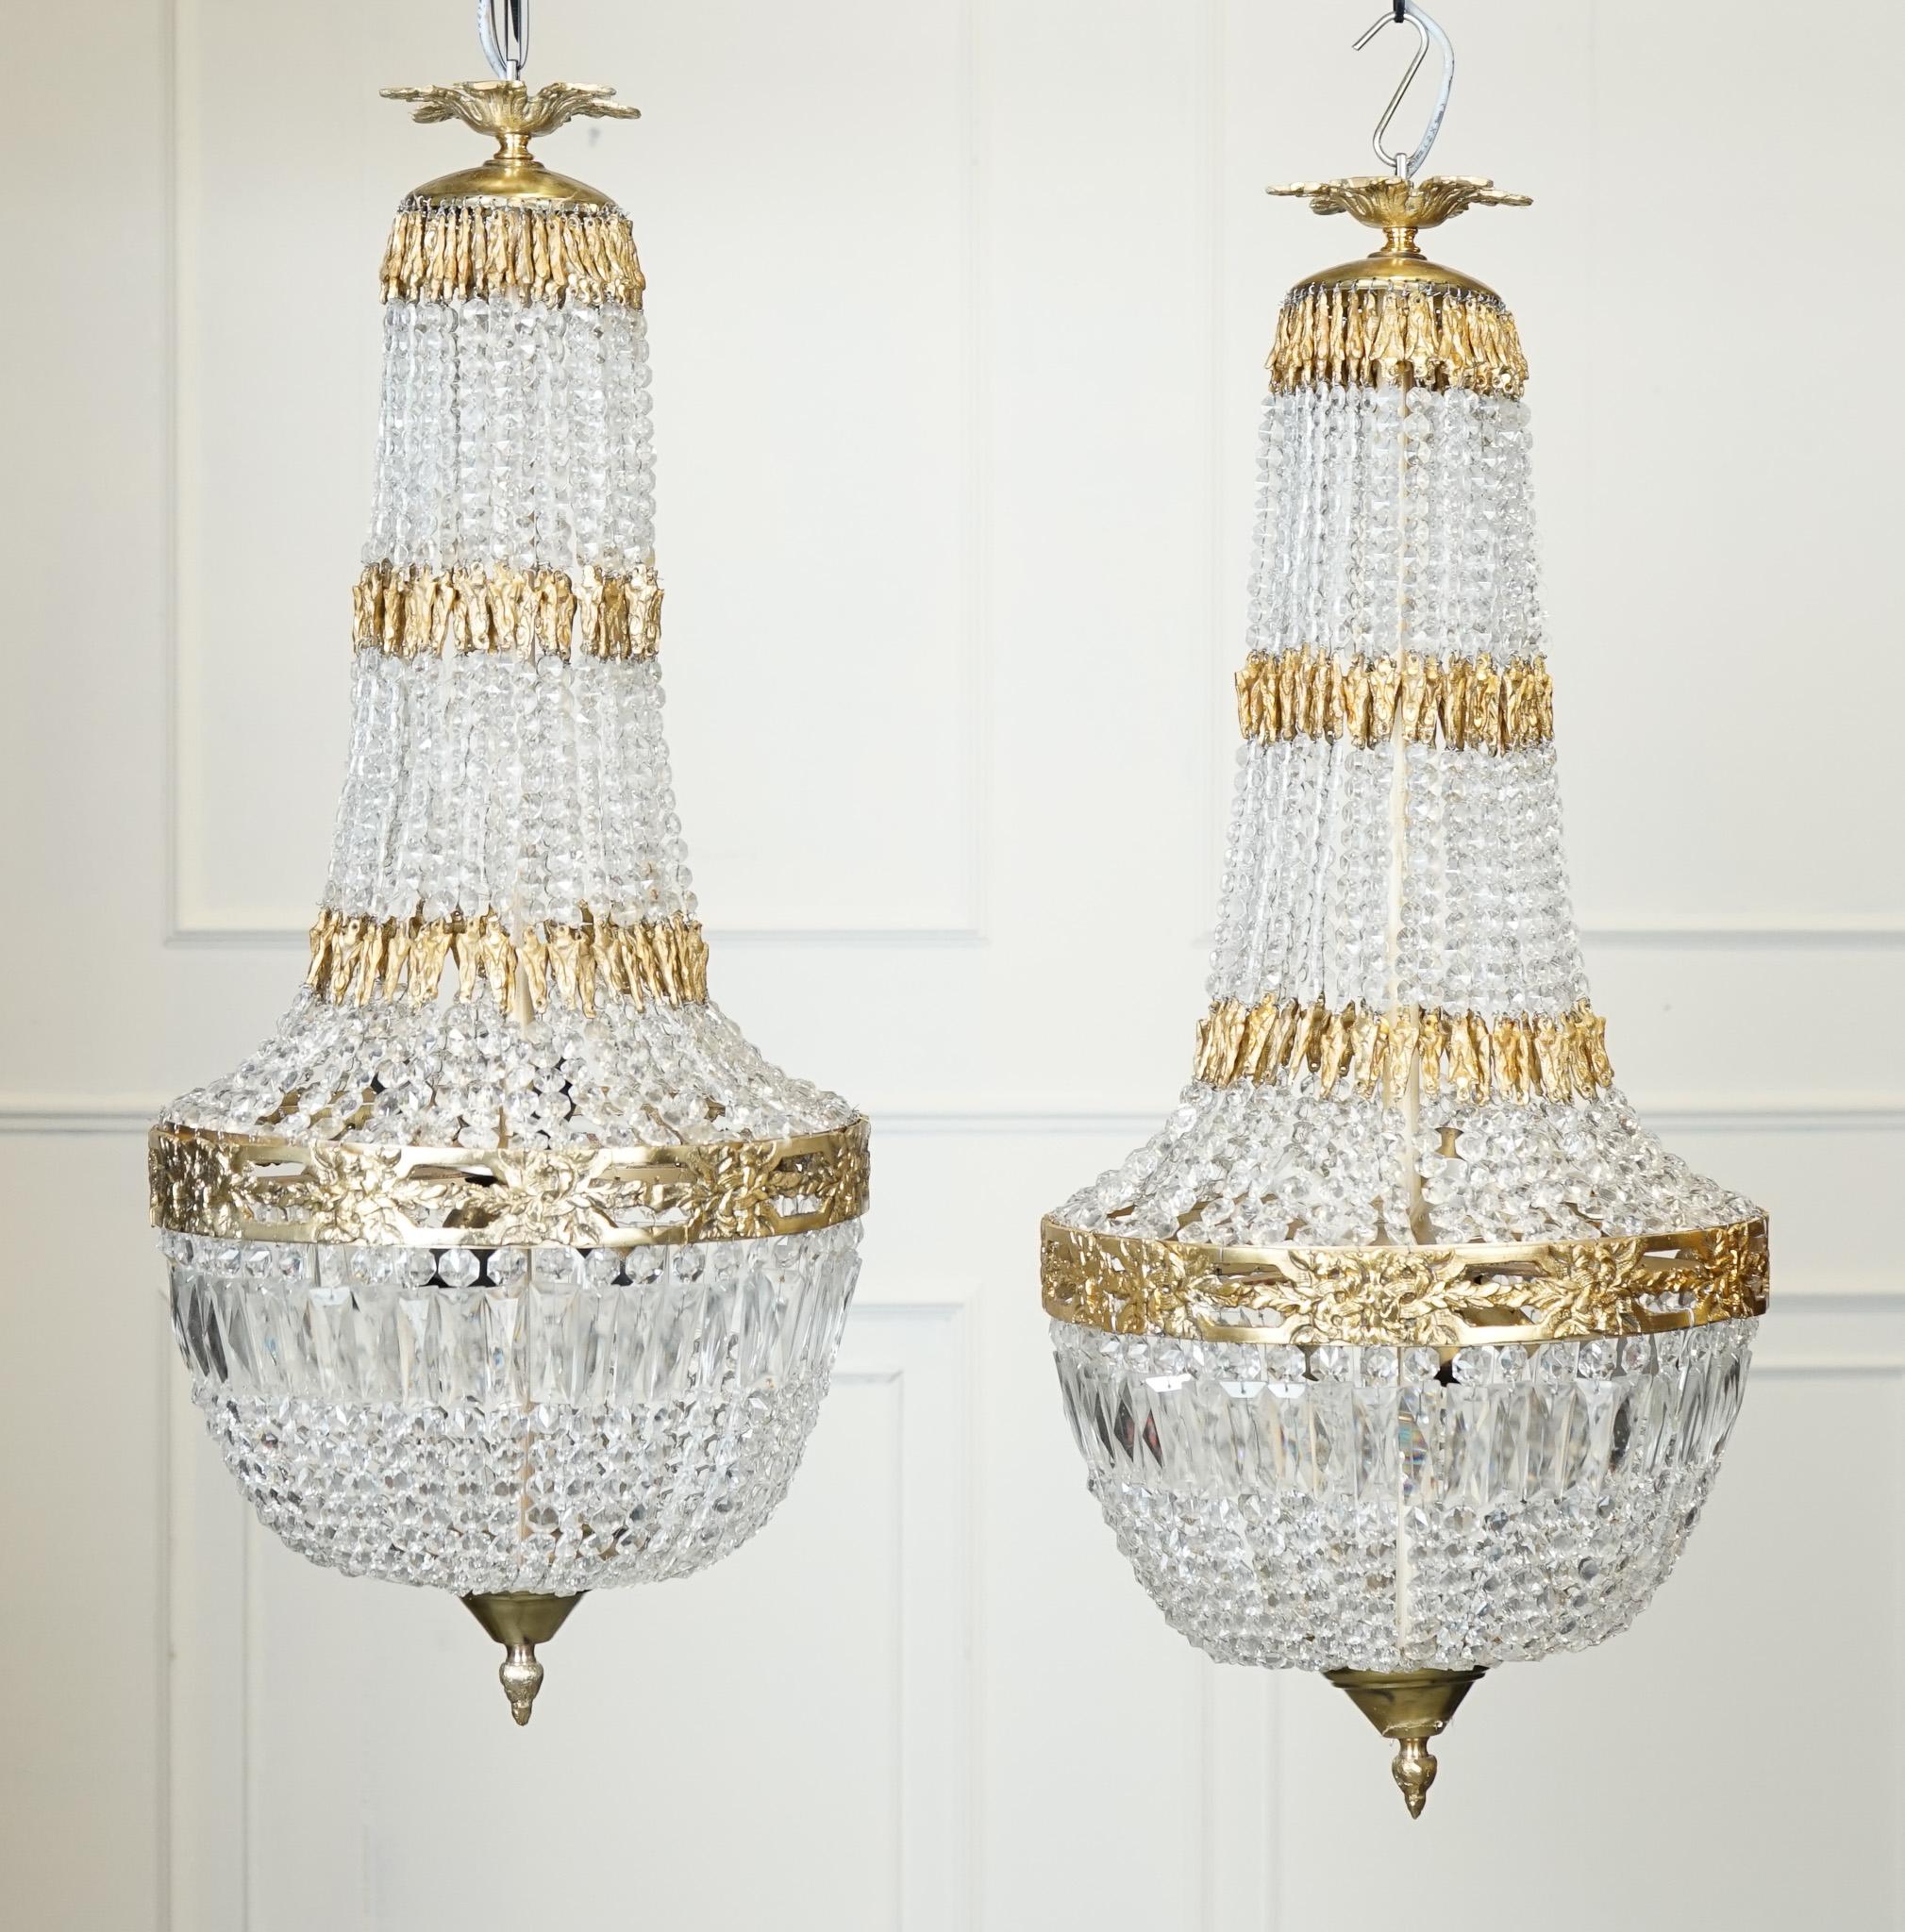 We delight to offer for sale this amazing pair of French Empire Bag Chandeliers , each one with six internal lights , aprox  98 cm height , PAT tested. All our chandeliers come with bulbs and ceiling fixings.
Don't hesitate to contact me if you have